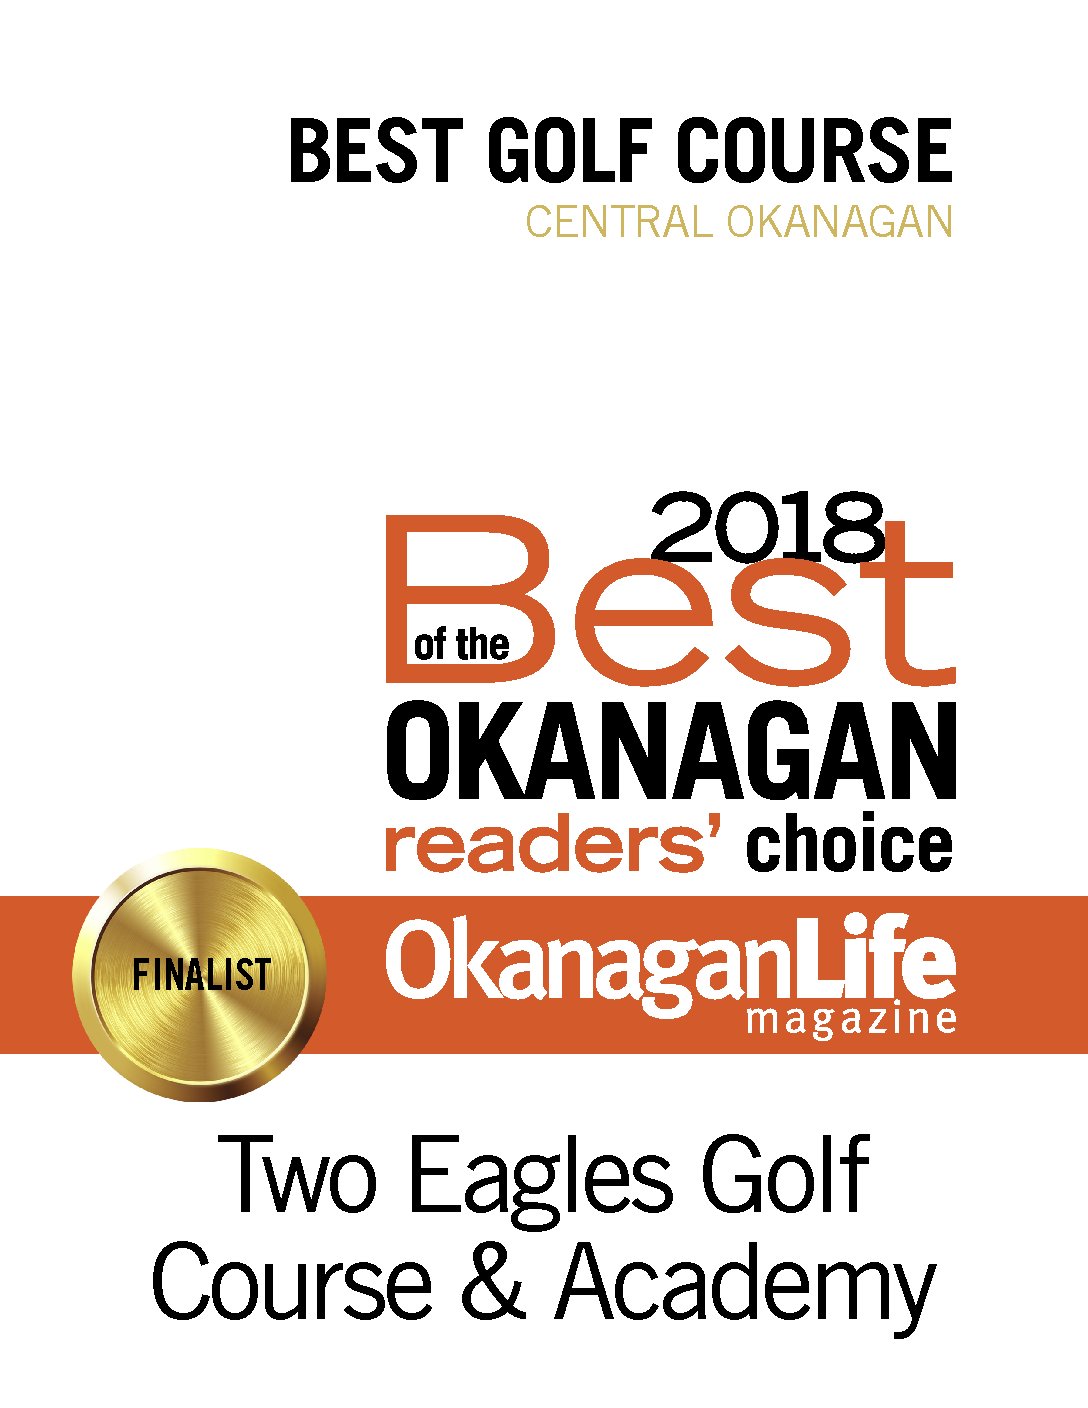 Two Eagles Golf Course